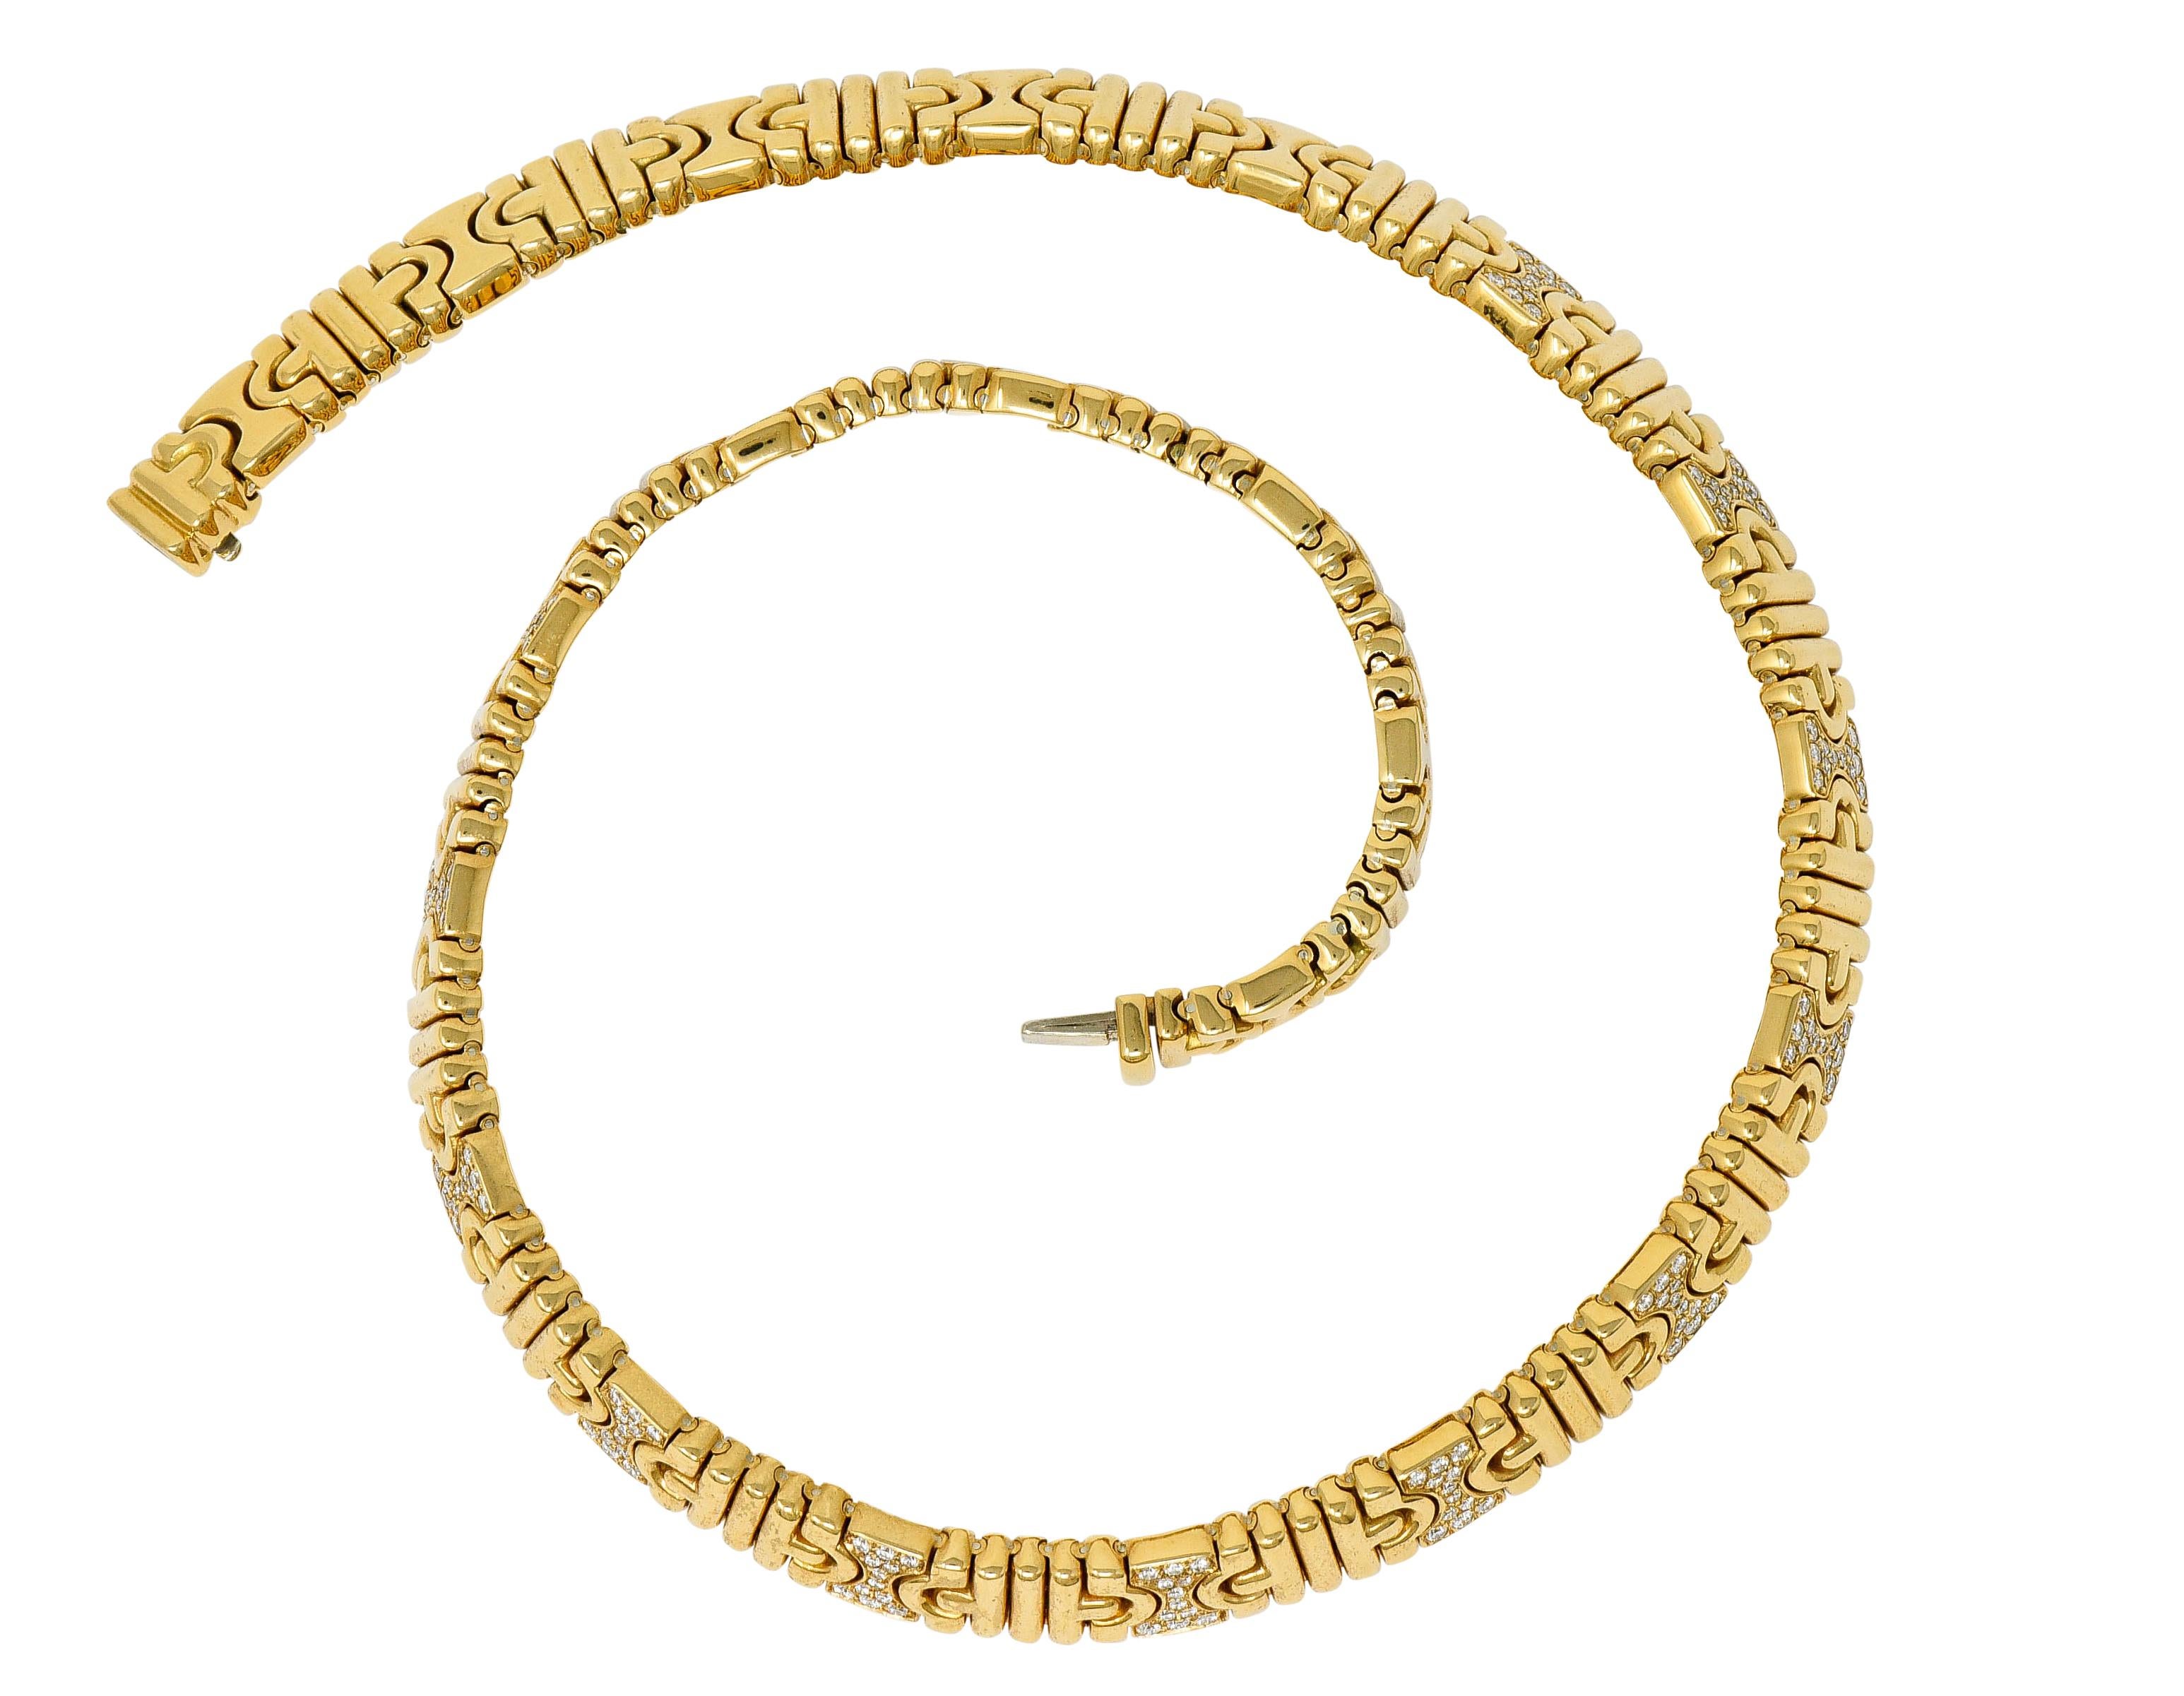 Collar style necklace comprised of hour glass and ribbed links that interlock in a flawless pattern

Accent links are pavè set with round brilliant cut diamonds weighing in total approximately 2.50 carats; G/H color with VS clarity

Completed by a